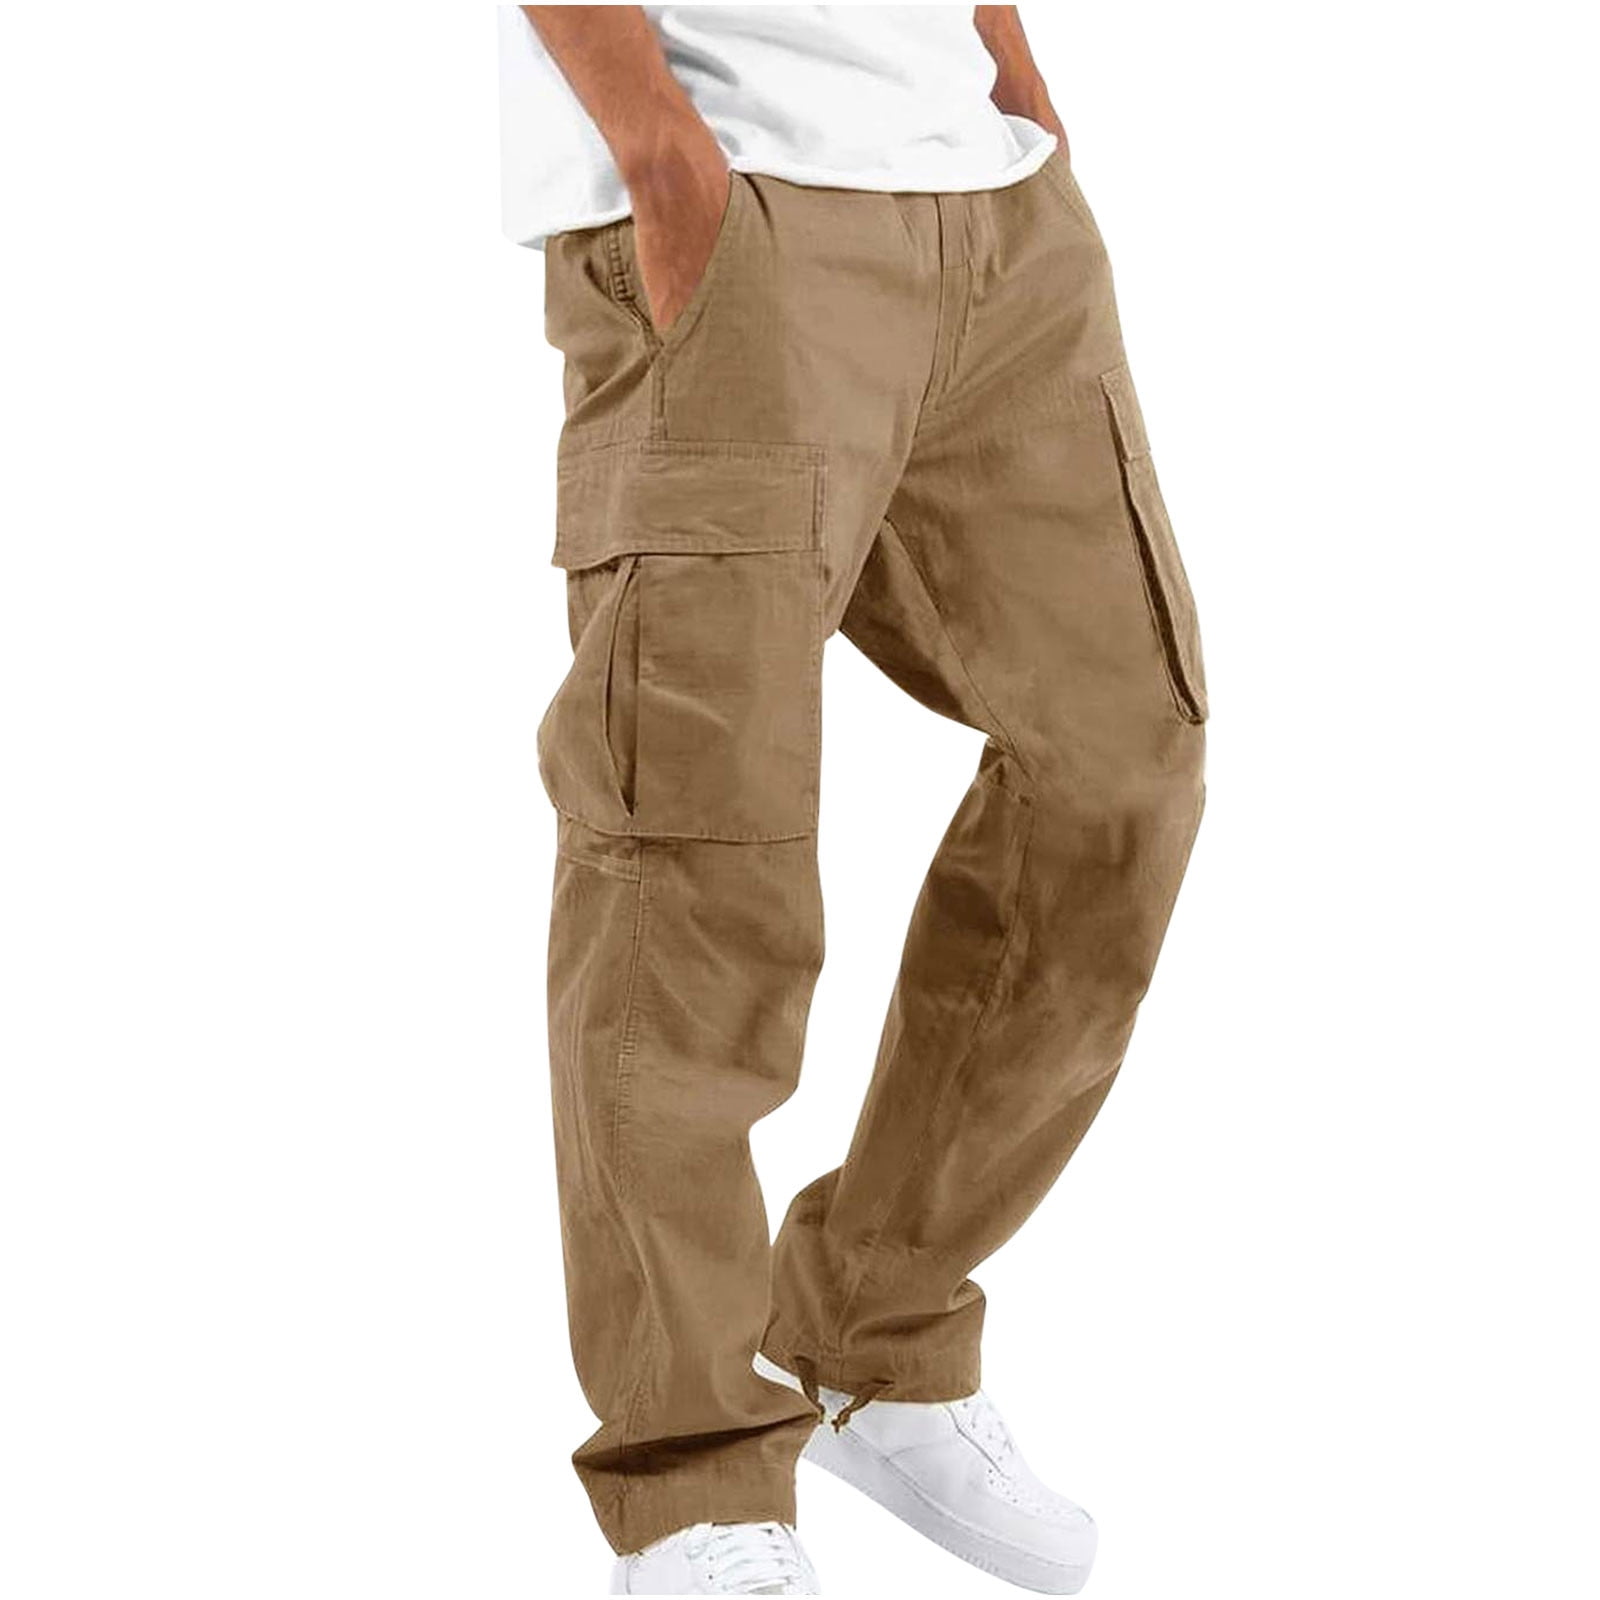 Clearance-sale Cargo Pants for Men Men Solid Casual Multiple Pockets  Outdoor Straight Type Fitness Pants Cargo Pants Trousers ,Gray,M -  Walmart.com